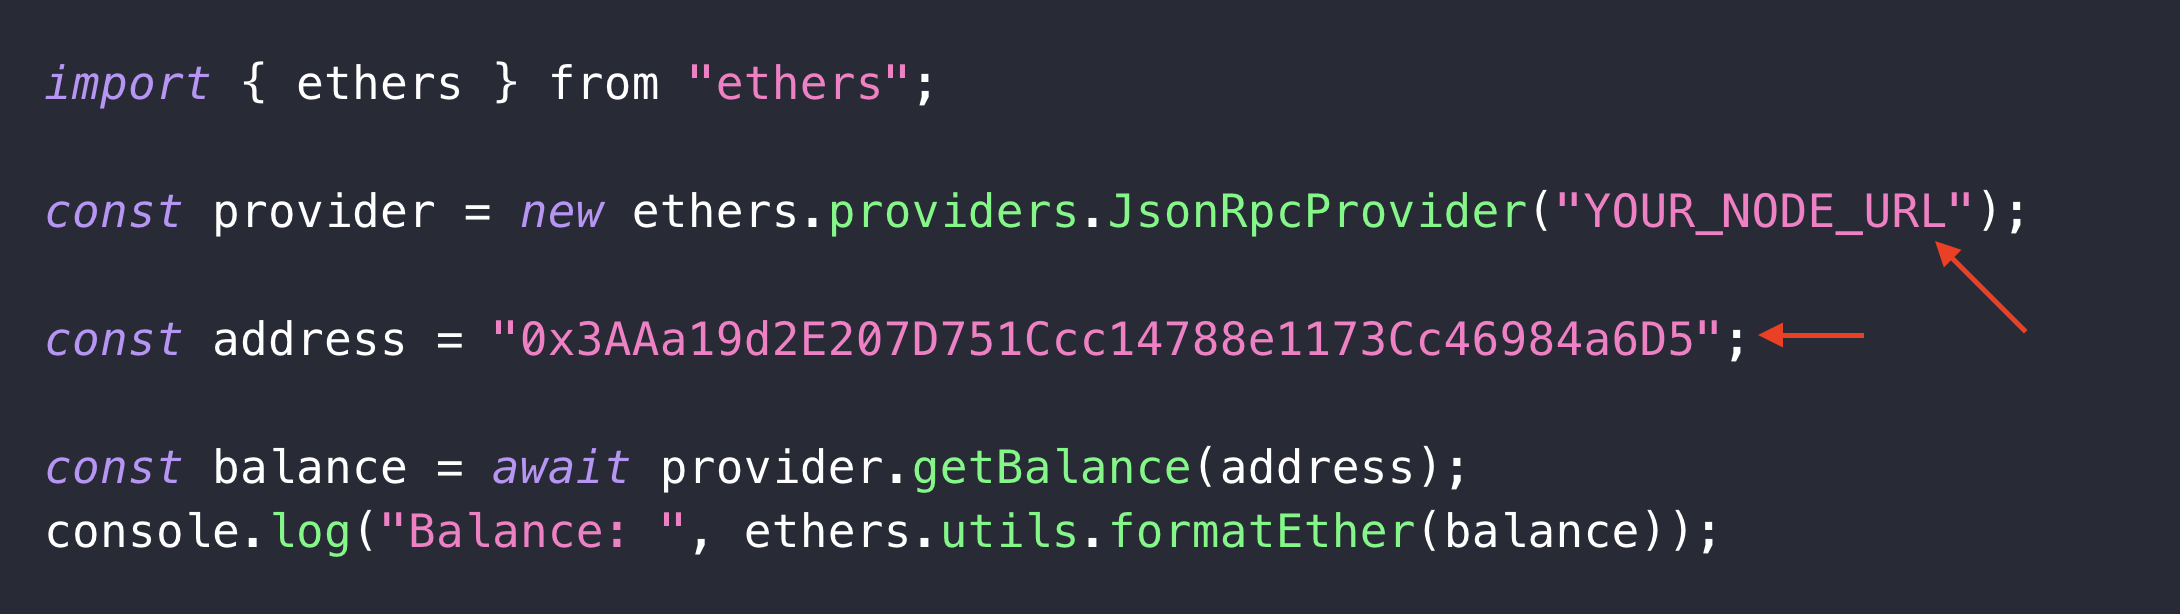 Red arrows pointing at "YOUR_NODE_URL" and "address" parameters in code editor.